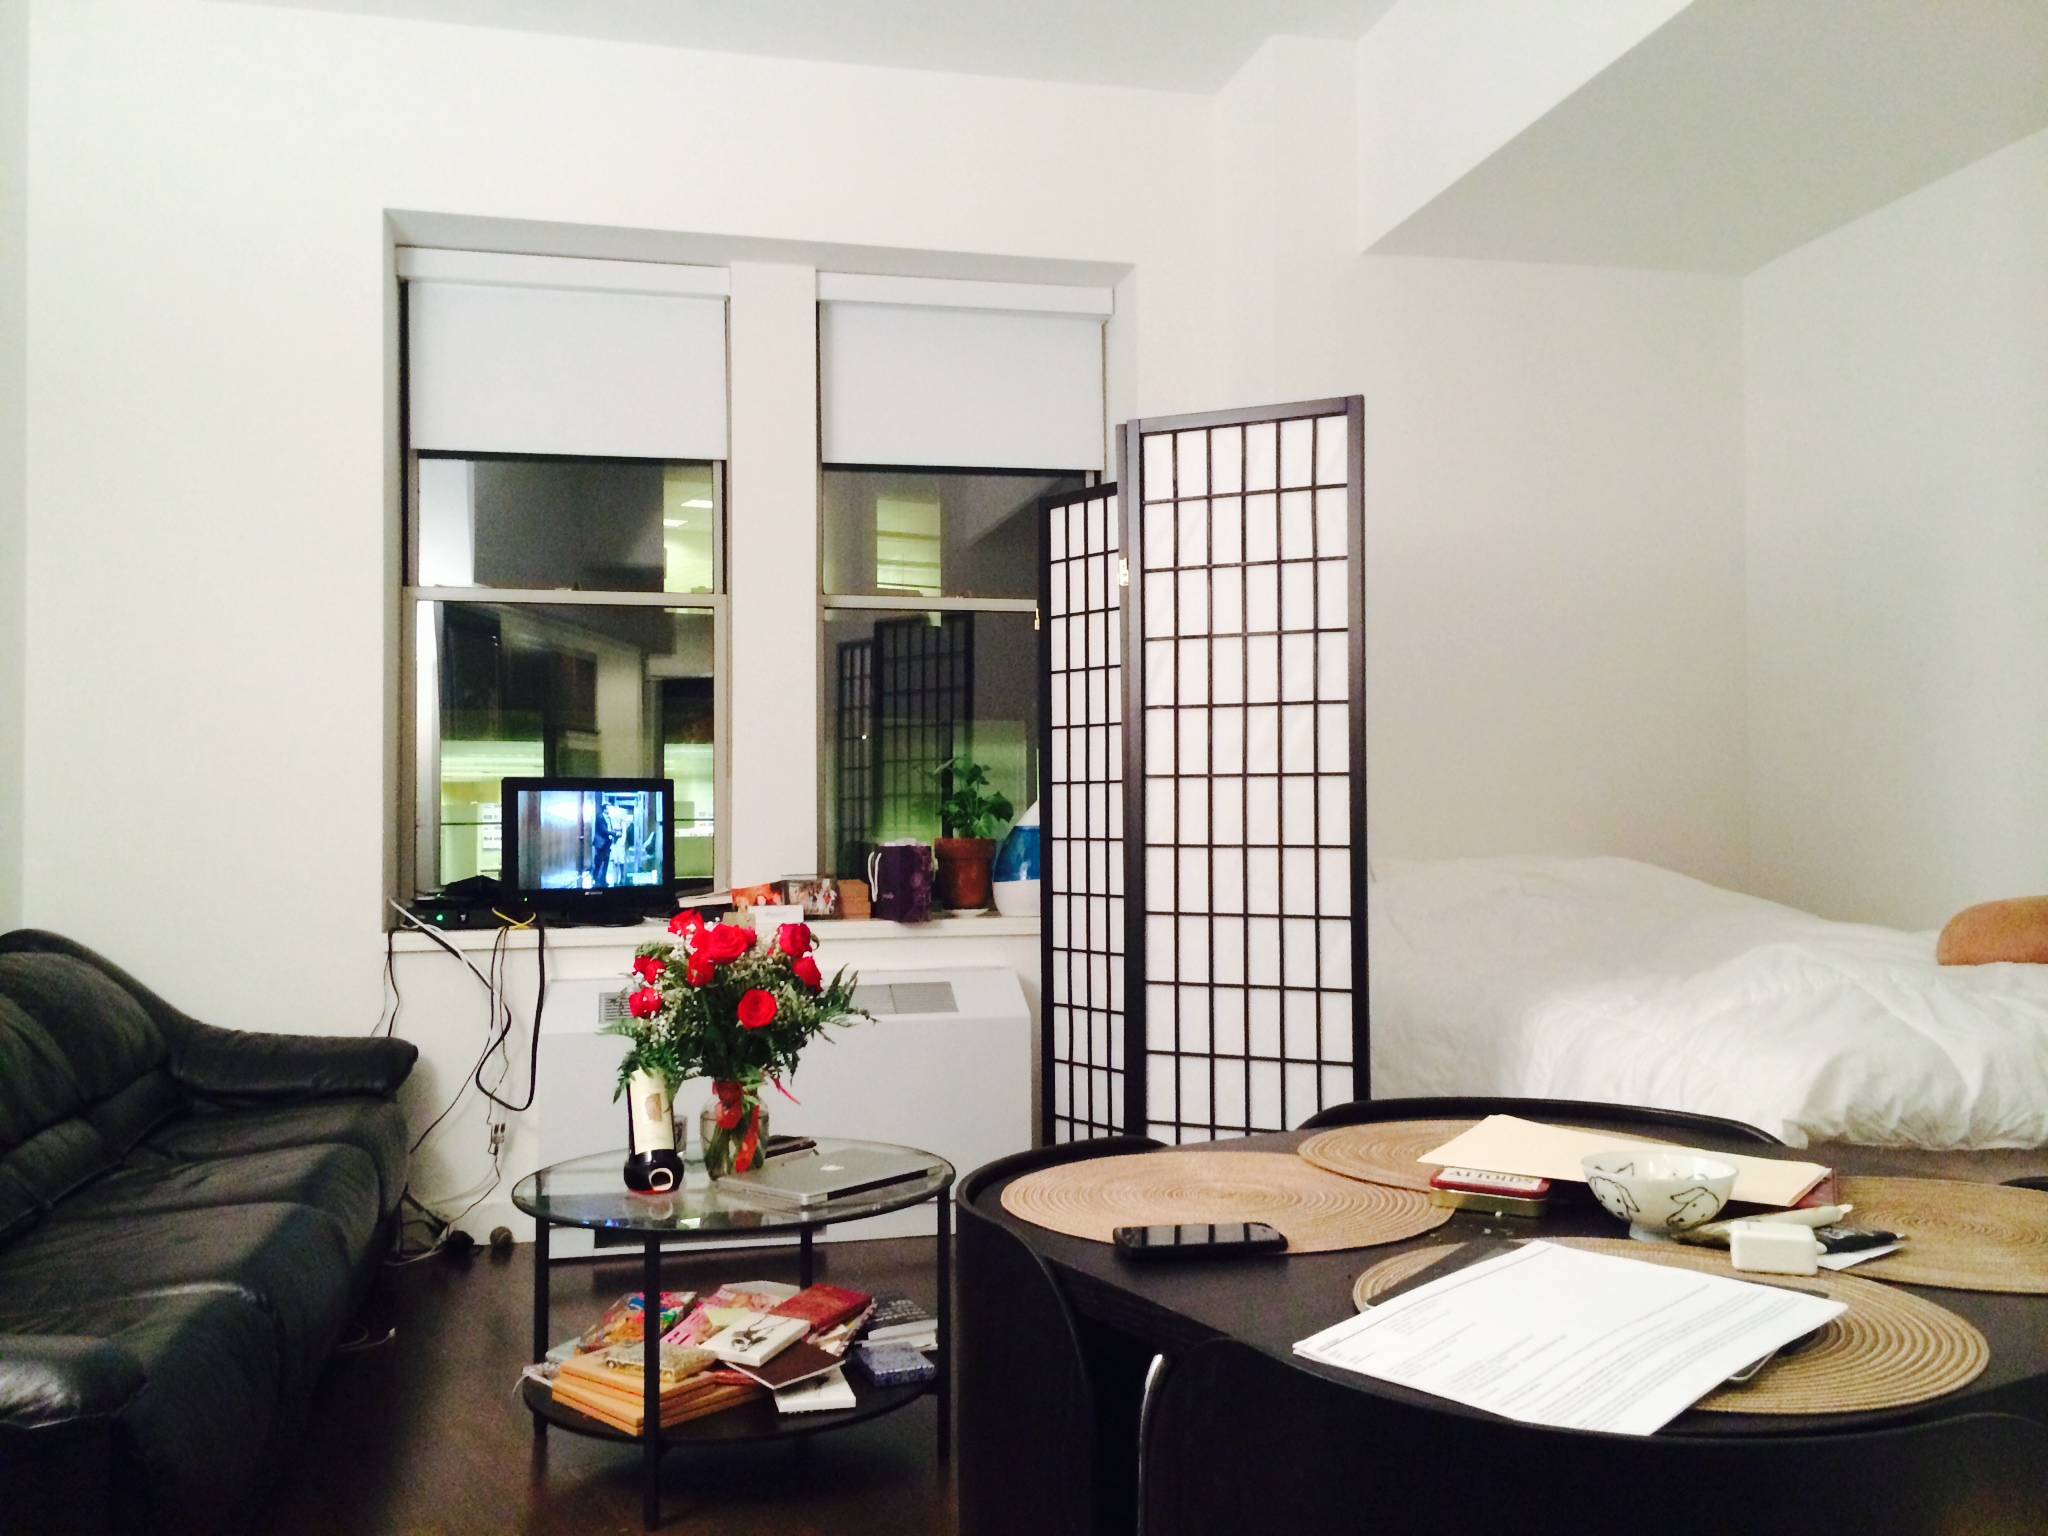 SHORT-TERM FURNISHED STUDIO RENTAL IN THE HEART OF FINANCIAL DISTRICT!